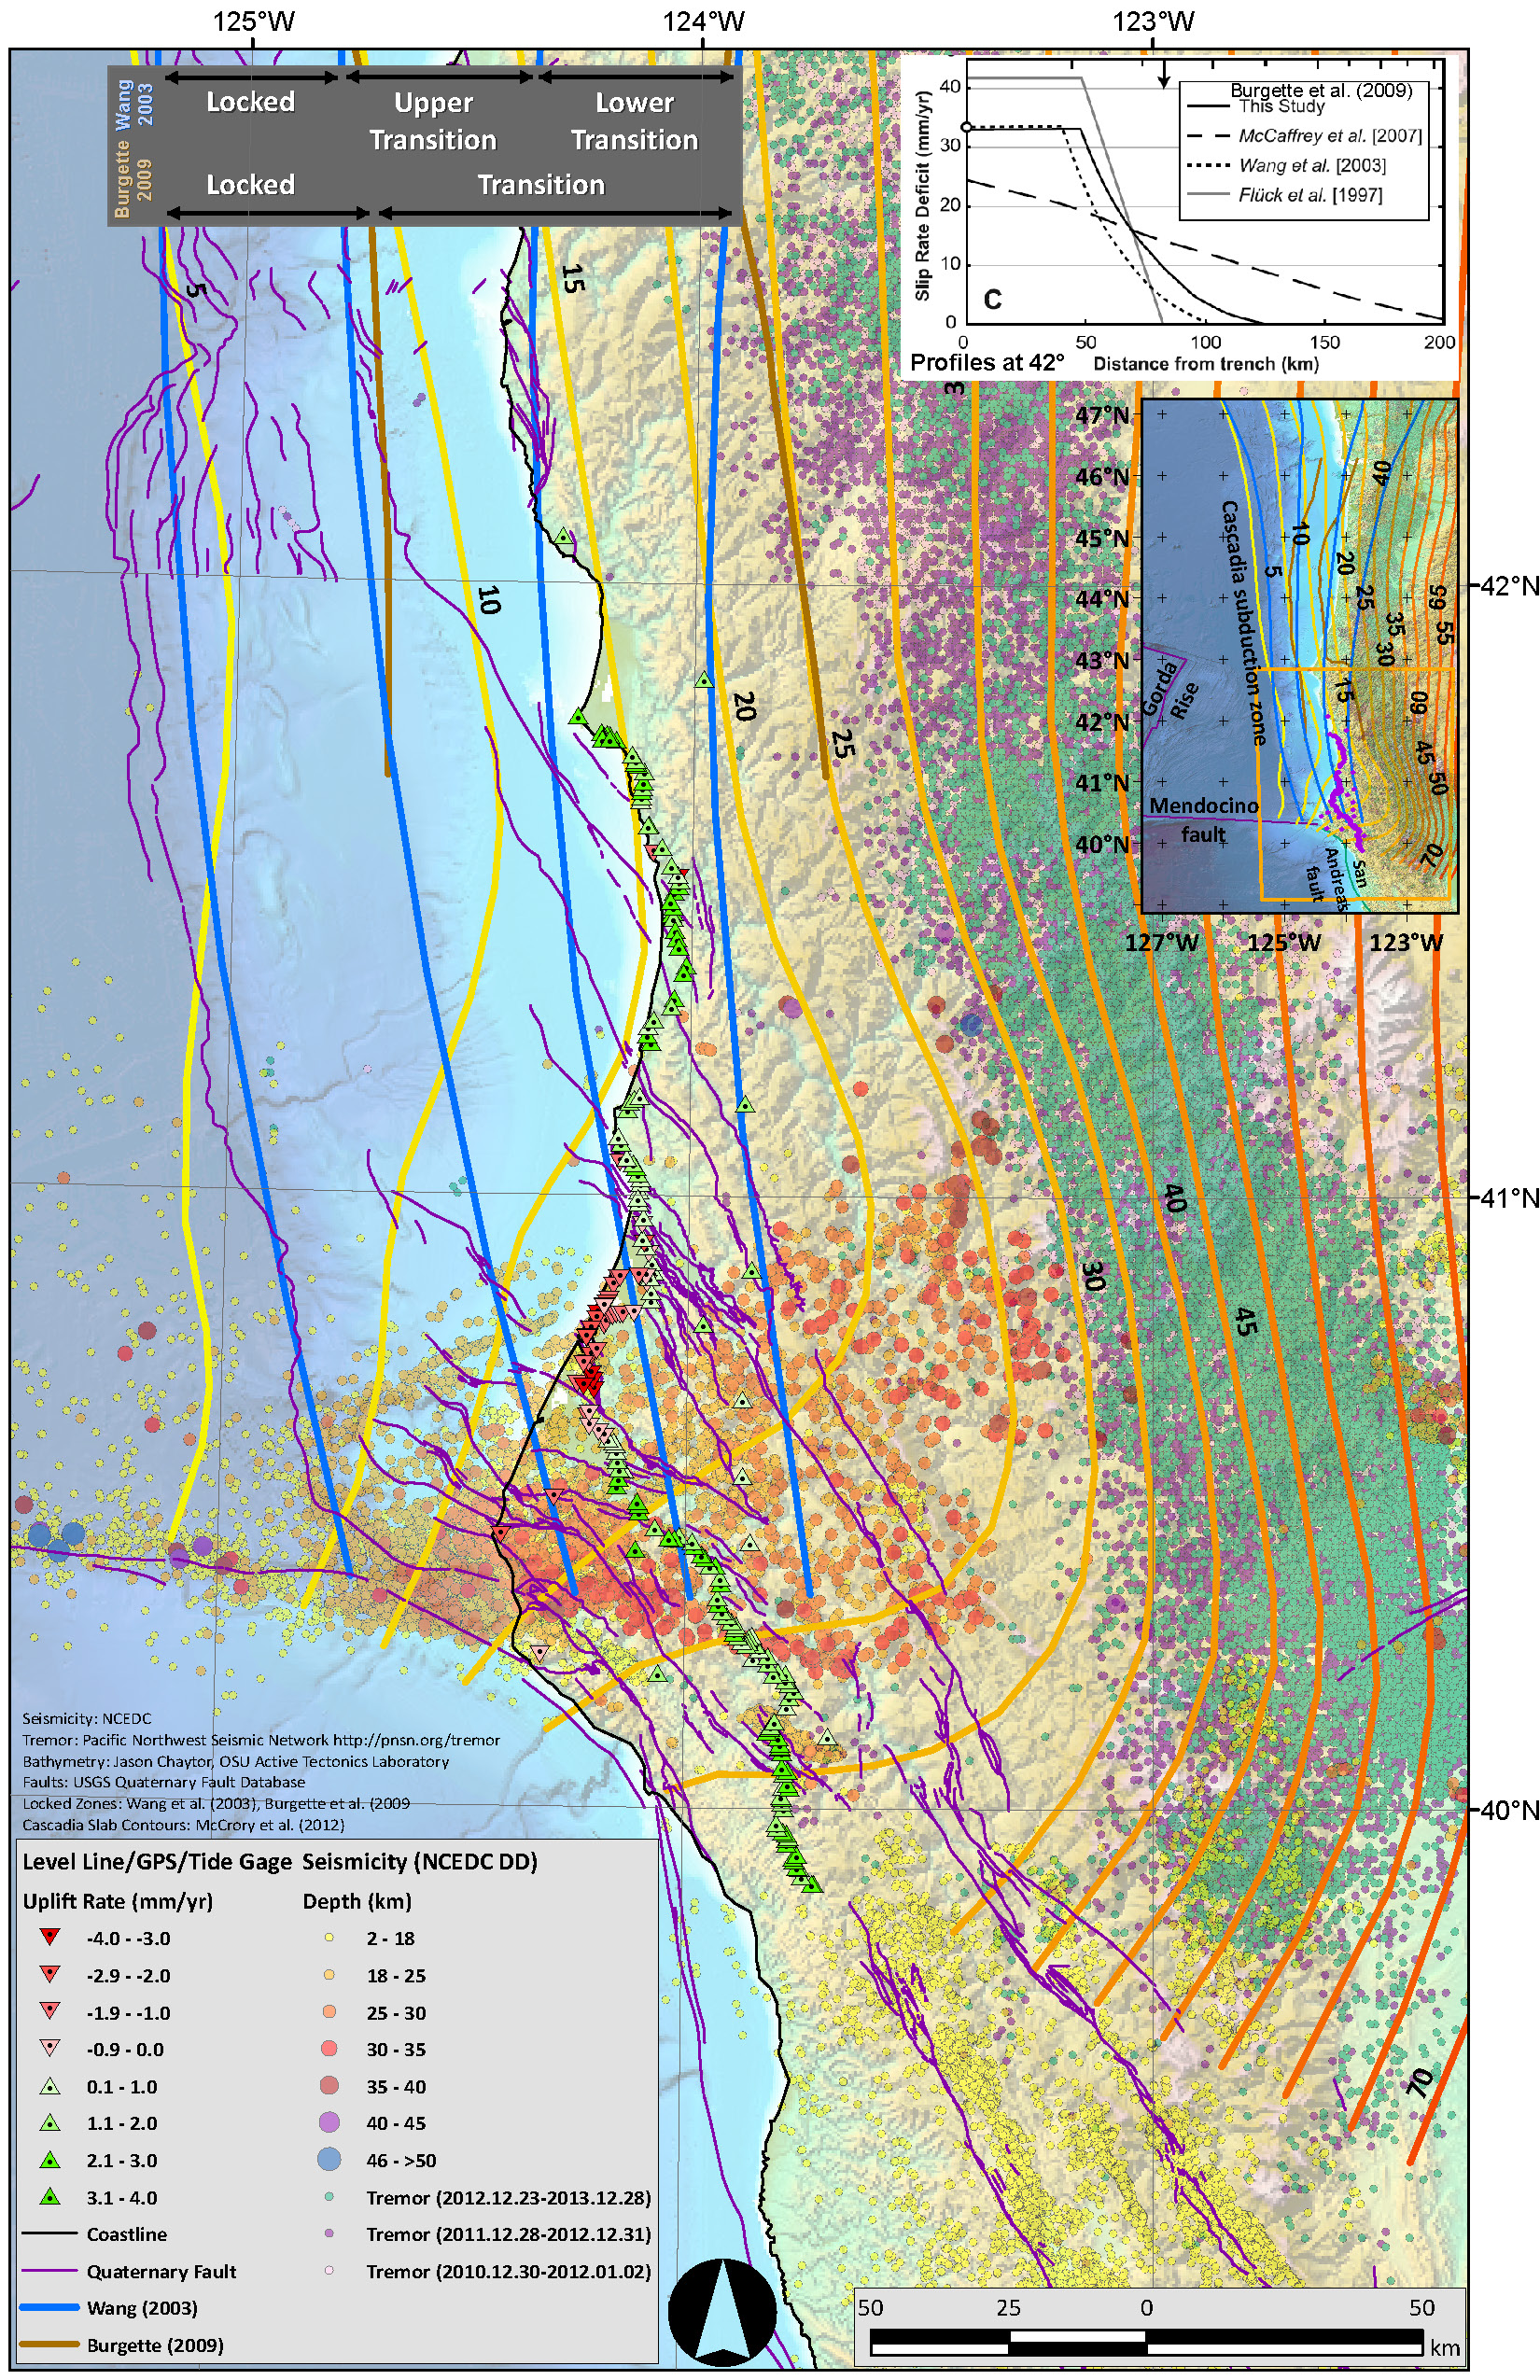 Earthquakes research report